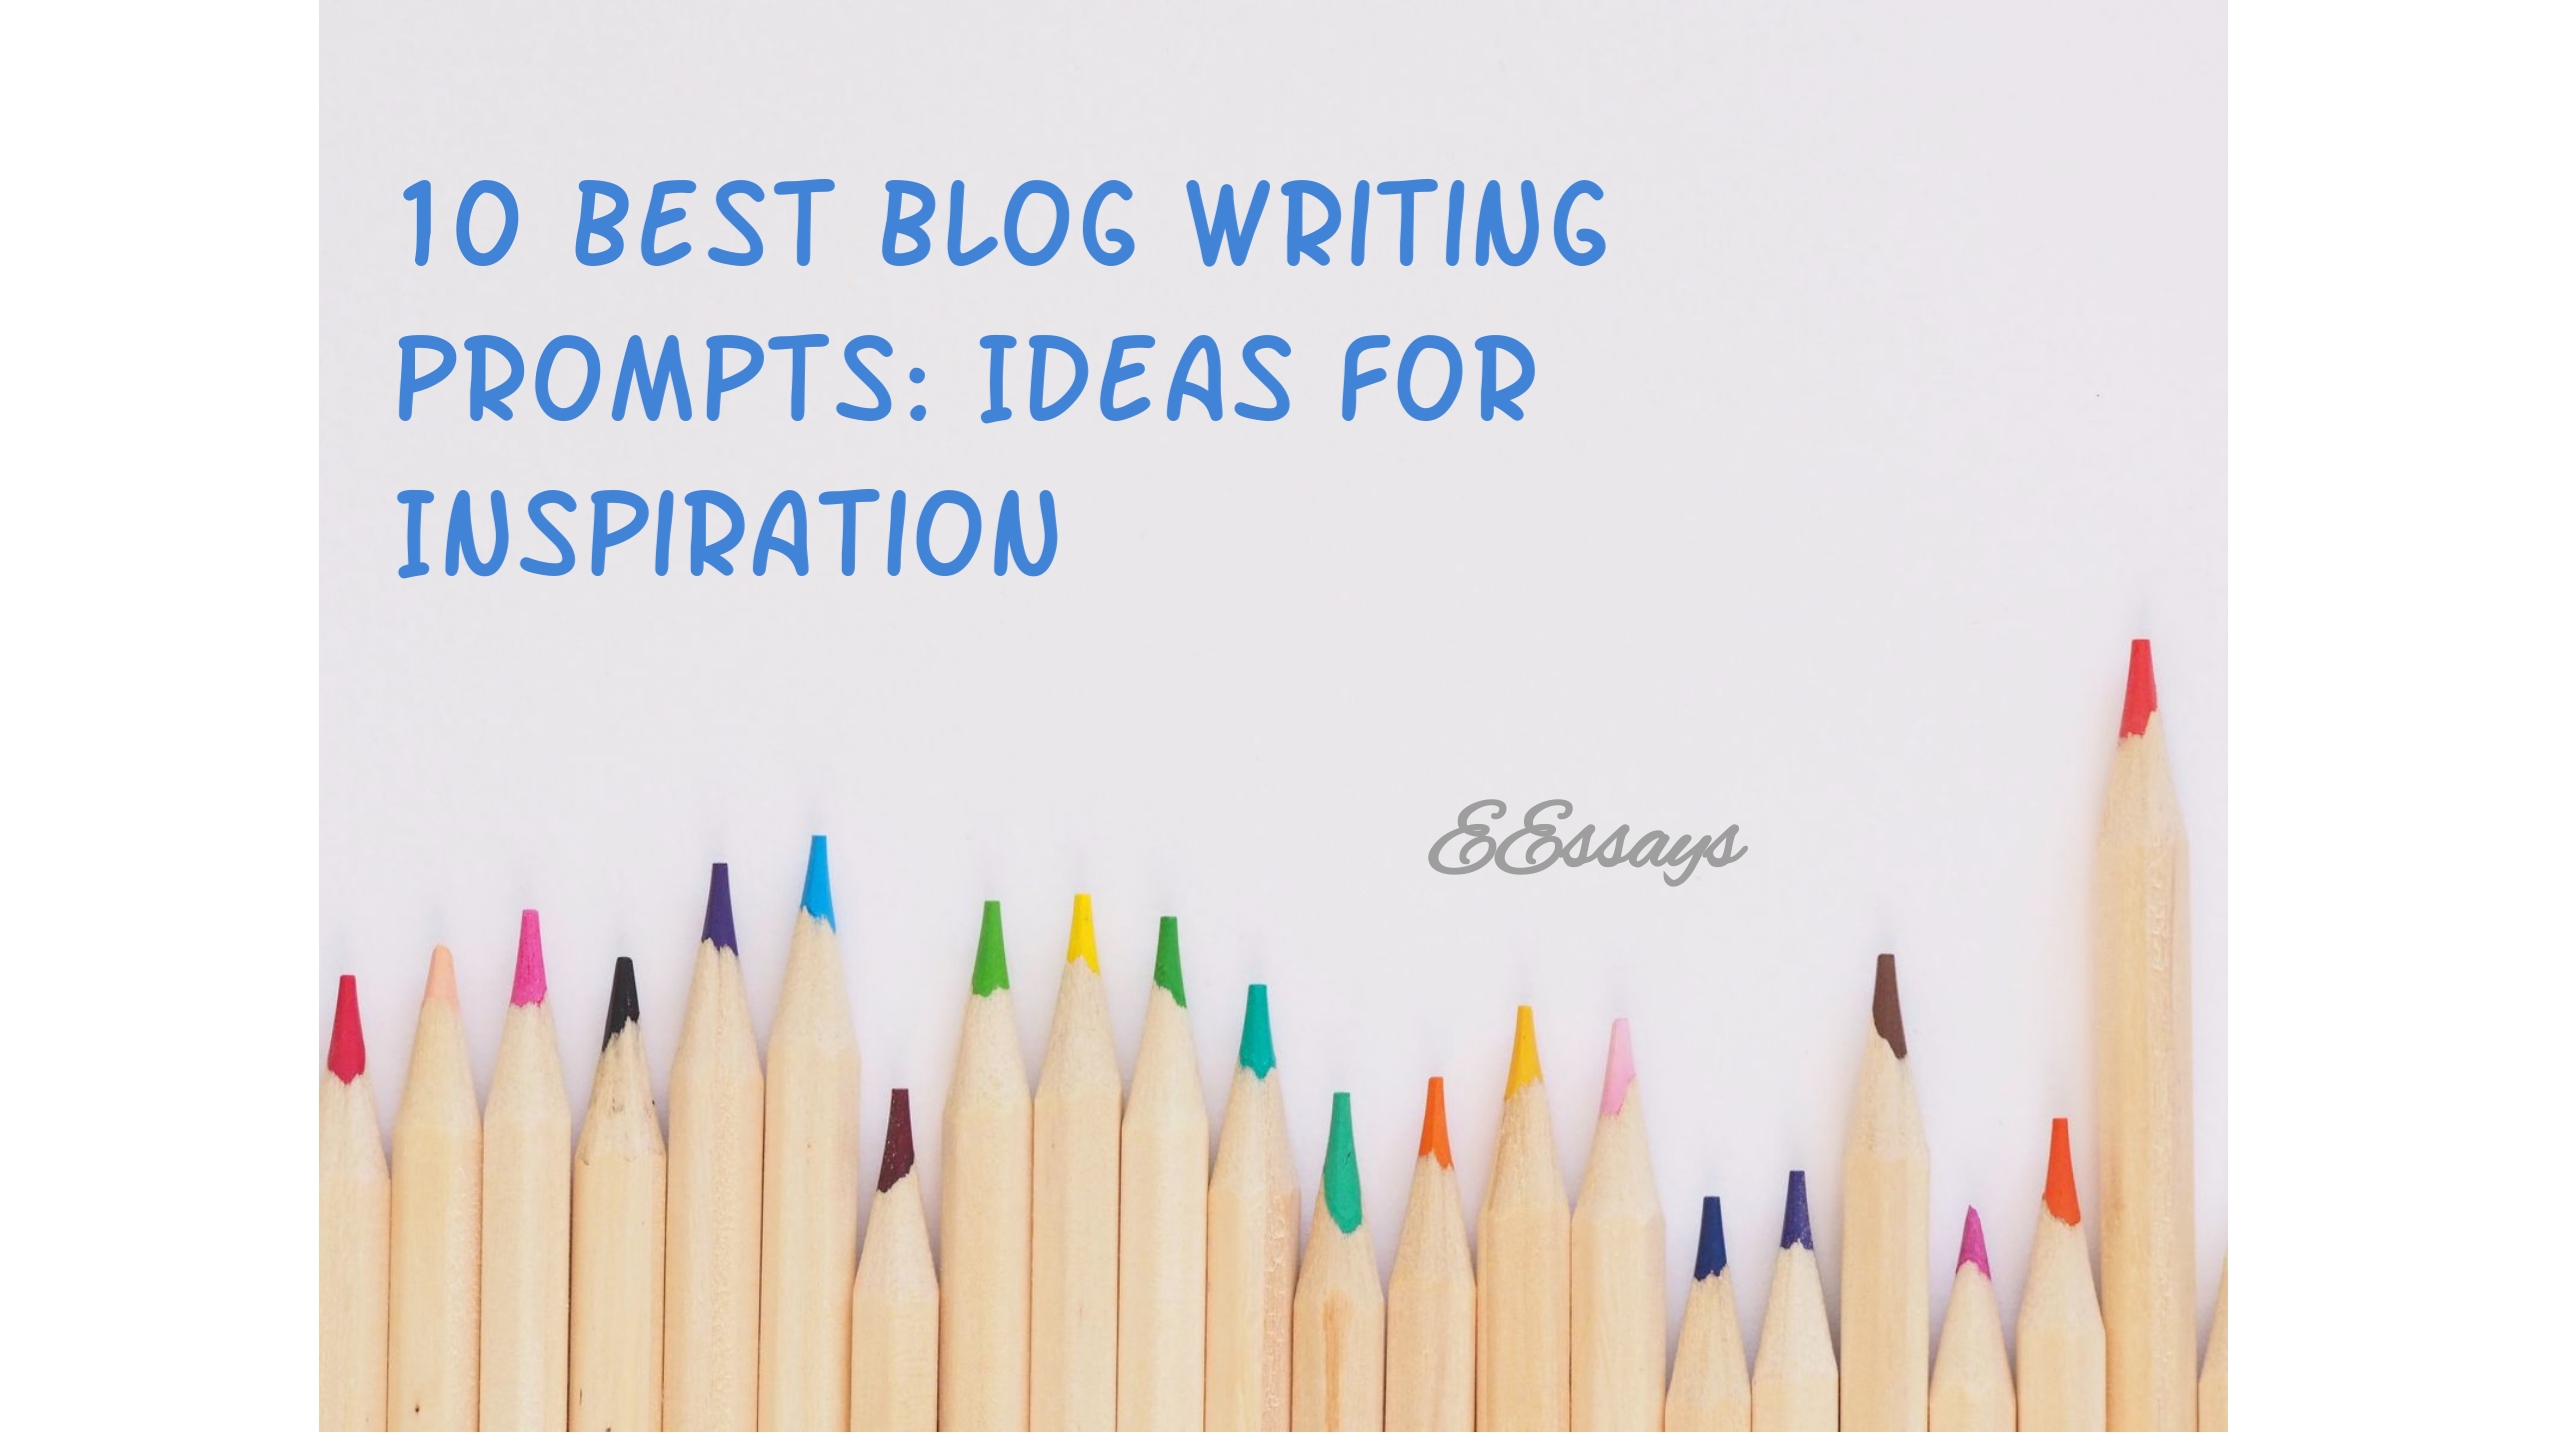 10 Best Blog Writing Prompts: Ideas for Inspiration